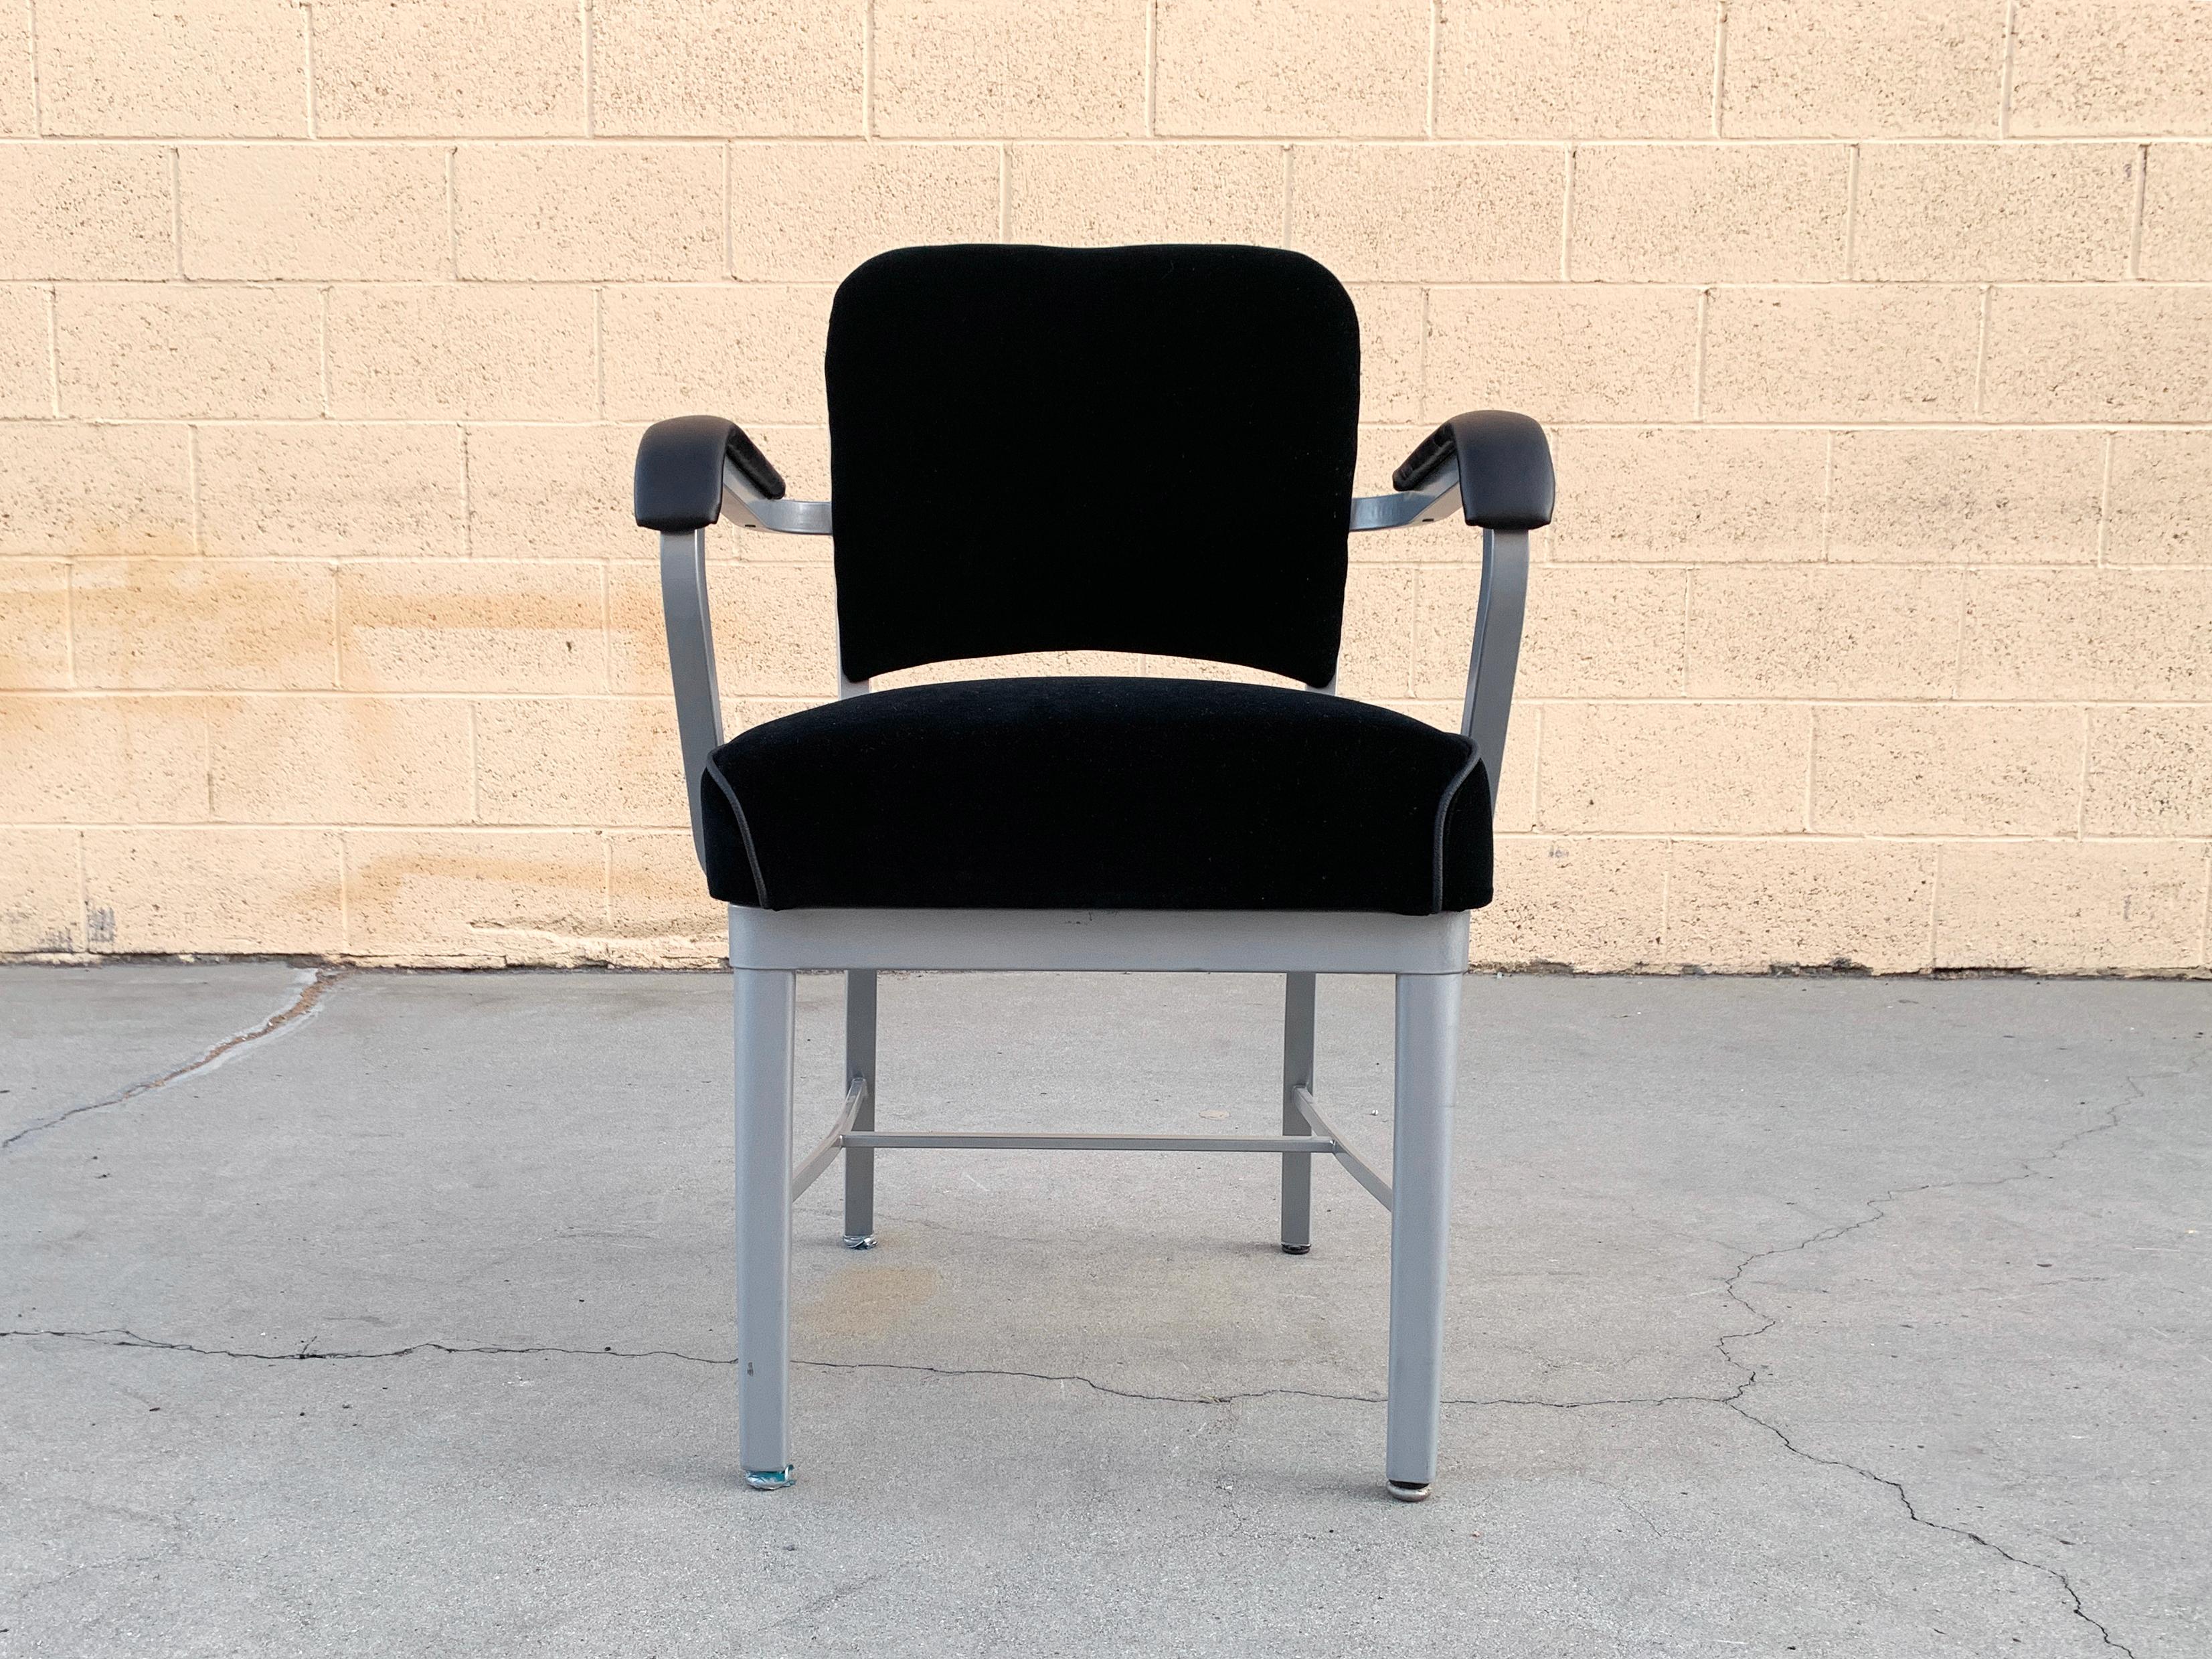 Classic midcentury steel tanker armchair refinished in metallic silver powder-coated frame (Bengal Silver) and upholstered in black velvet with black leather arms. Most likely attributed to Steelcase, circa 1950s. 

Dimensions: 21